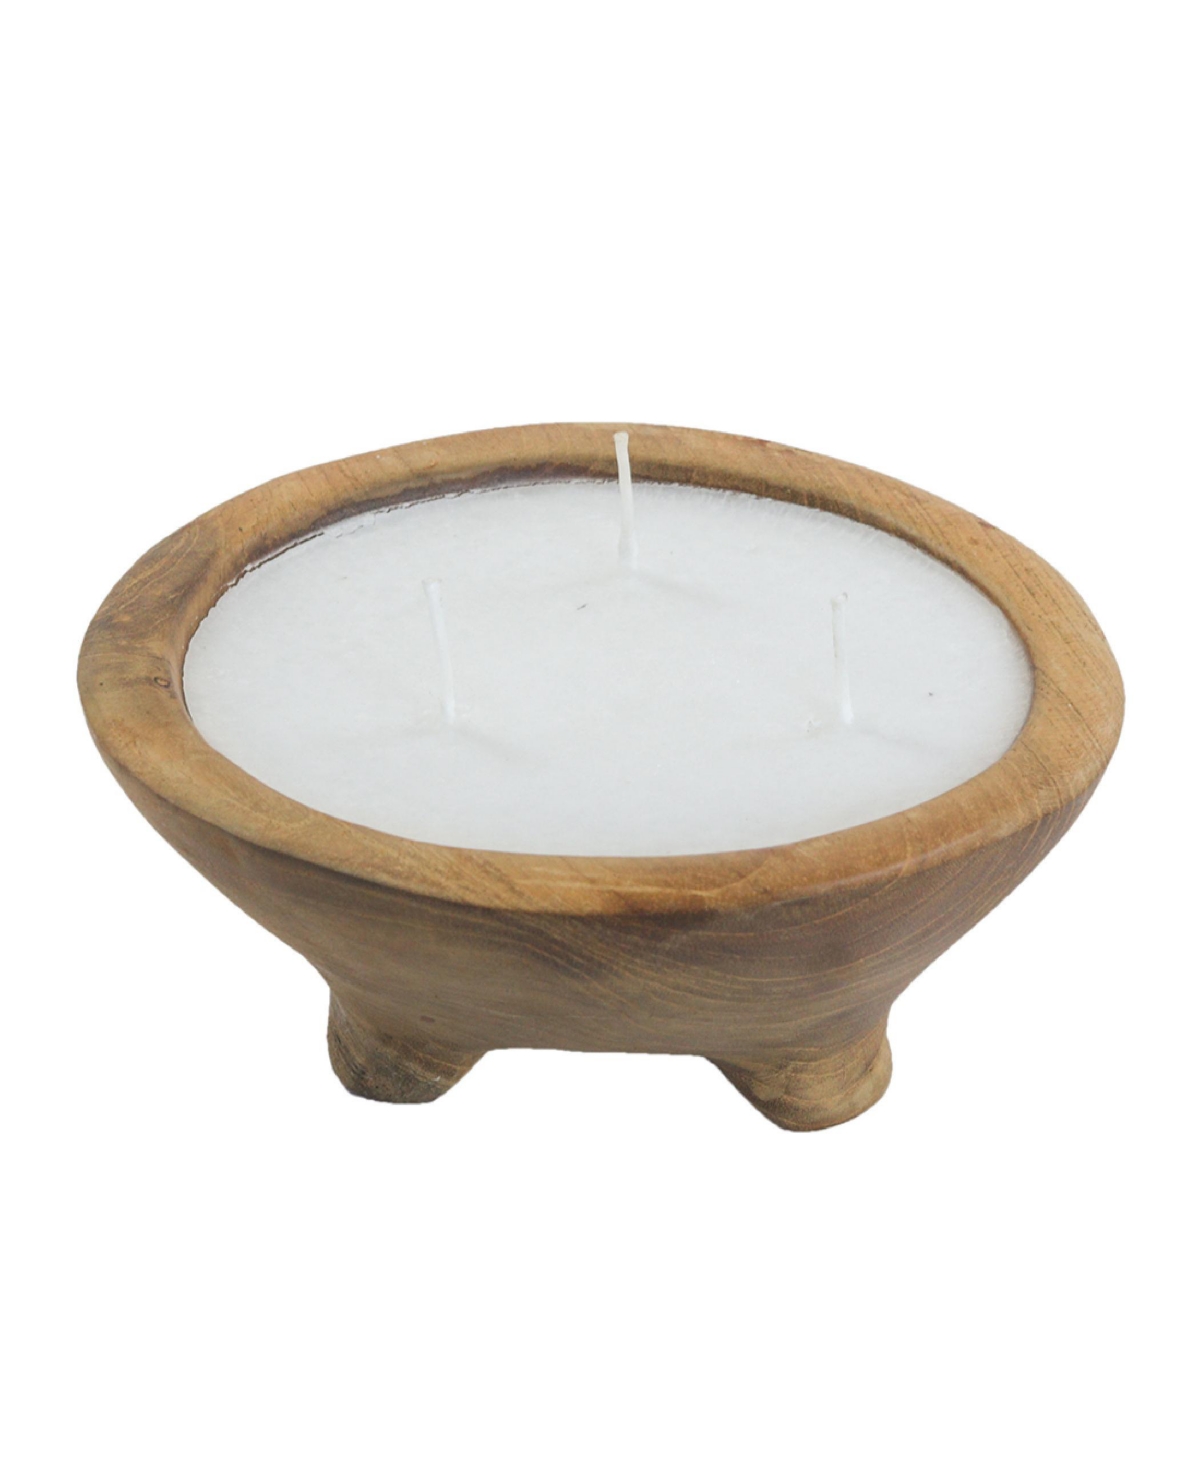 Ab Home 3-wick Candle In Teak Holder, 6" W X 6" L X 2.5" H In Natural